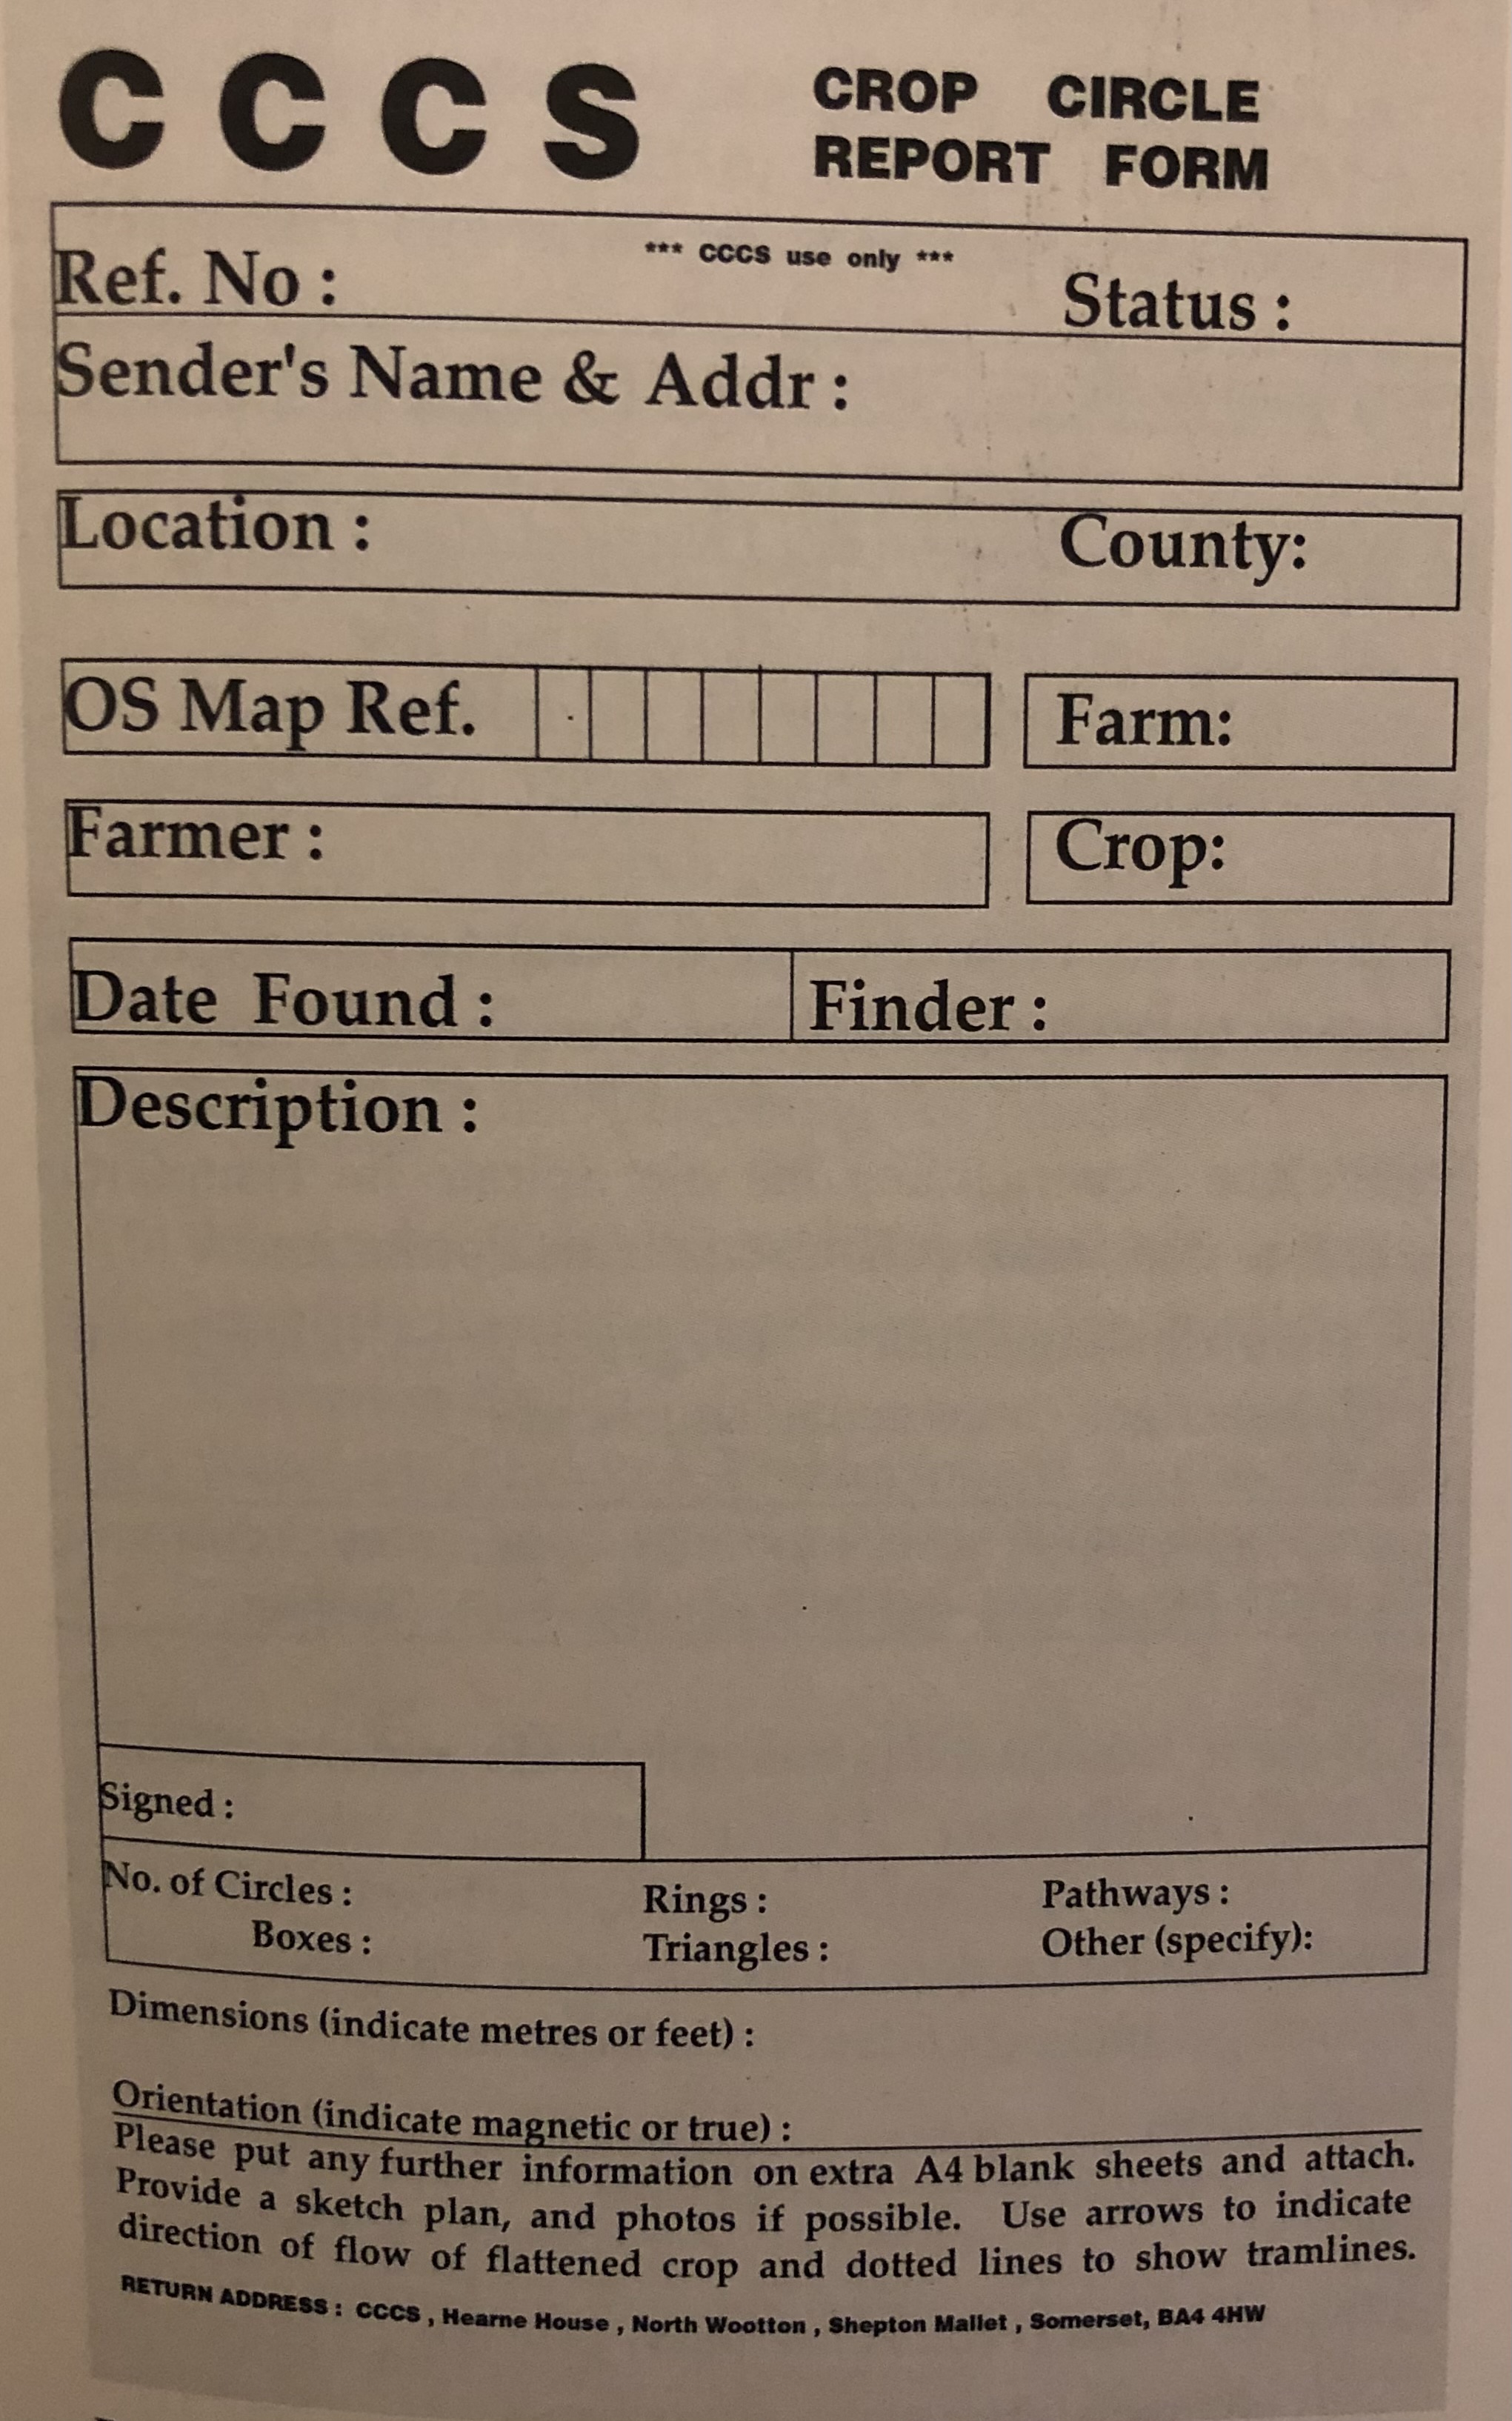 A photograph of a form that reads, 'CCCS, Crop Circle Report Form' in bold at the top, with several sections to fill in including, 'Location:'', 'Farmer:', 'Date Found:', 'Finder:', 'Description:', 'No. of Circles….' etc.